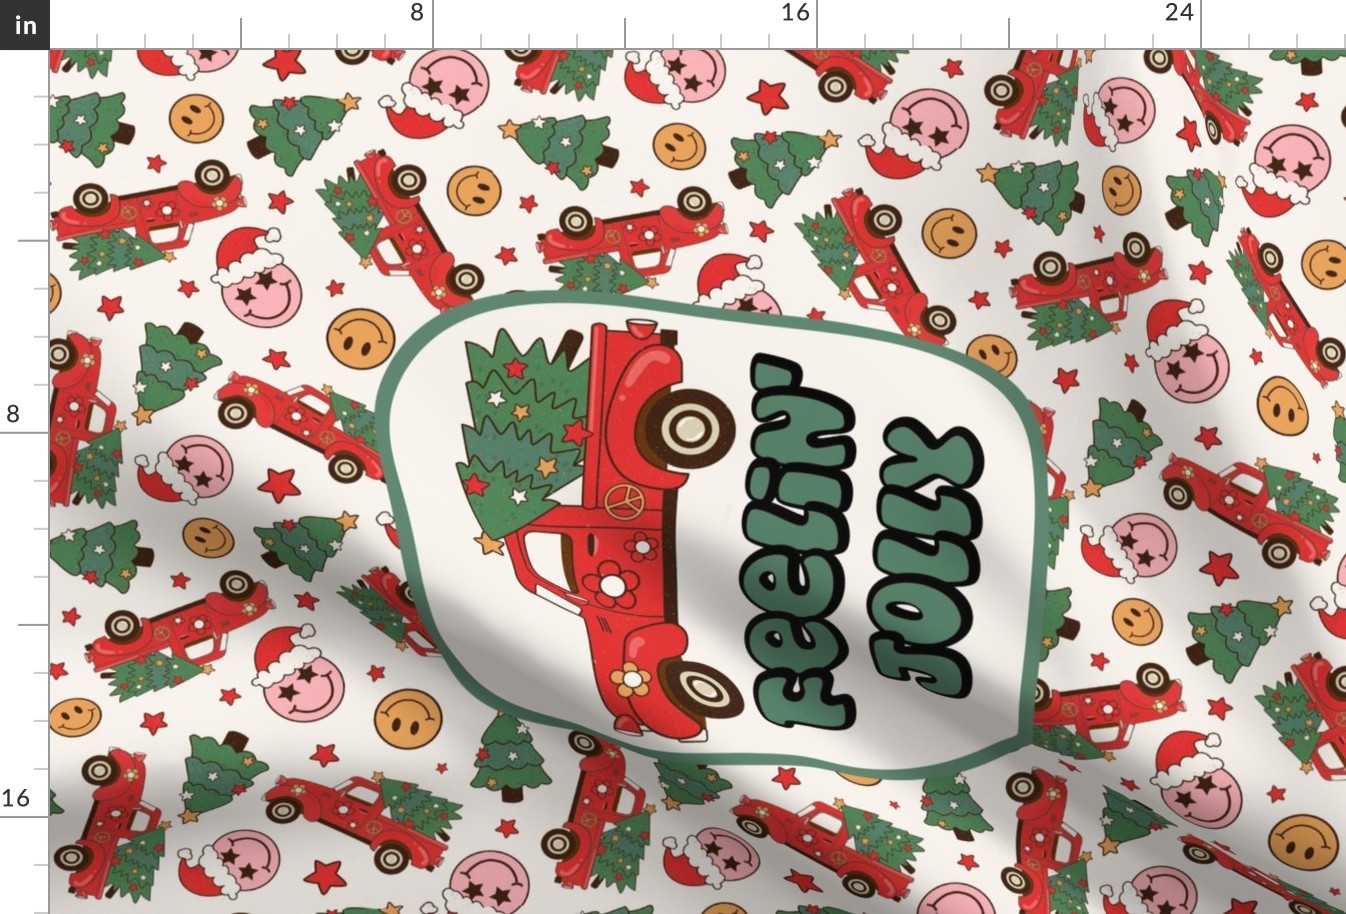 Large 27x18 Fat Quarter Panel Feelin' Jolly Red Holiday Truck Groovy Christmas for Tea Towel or Wall Hanging